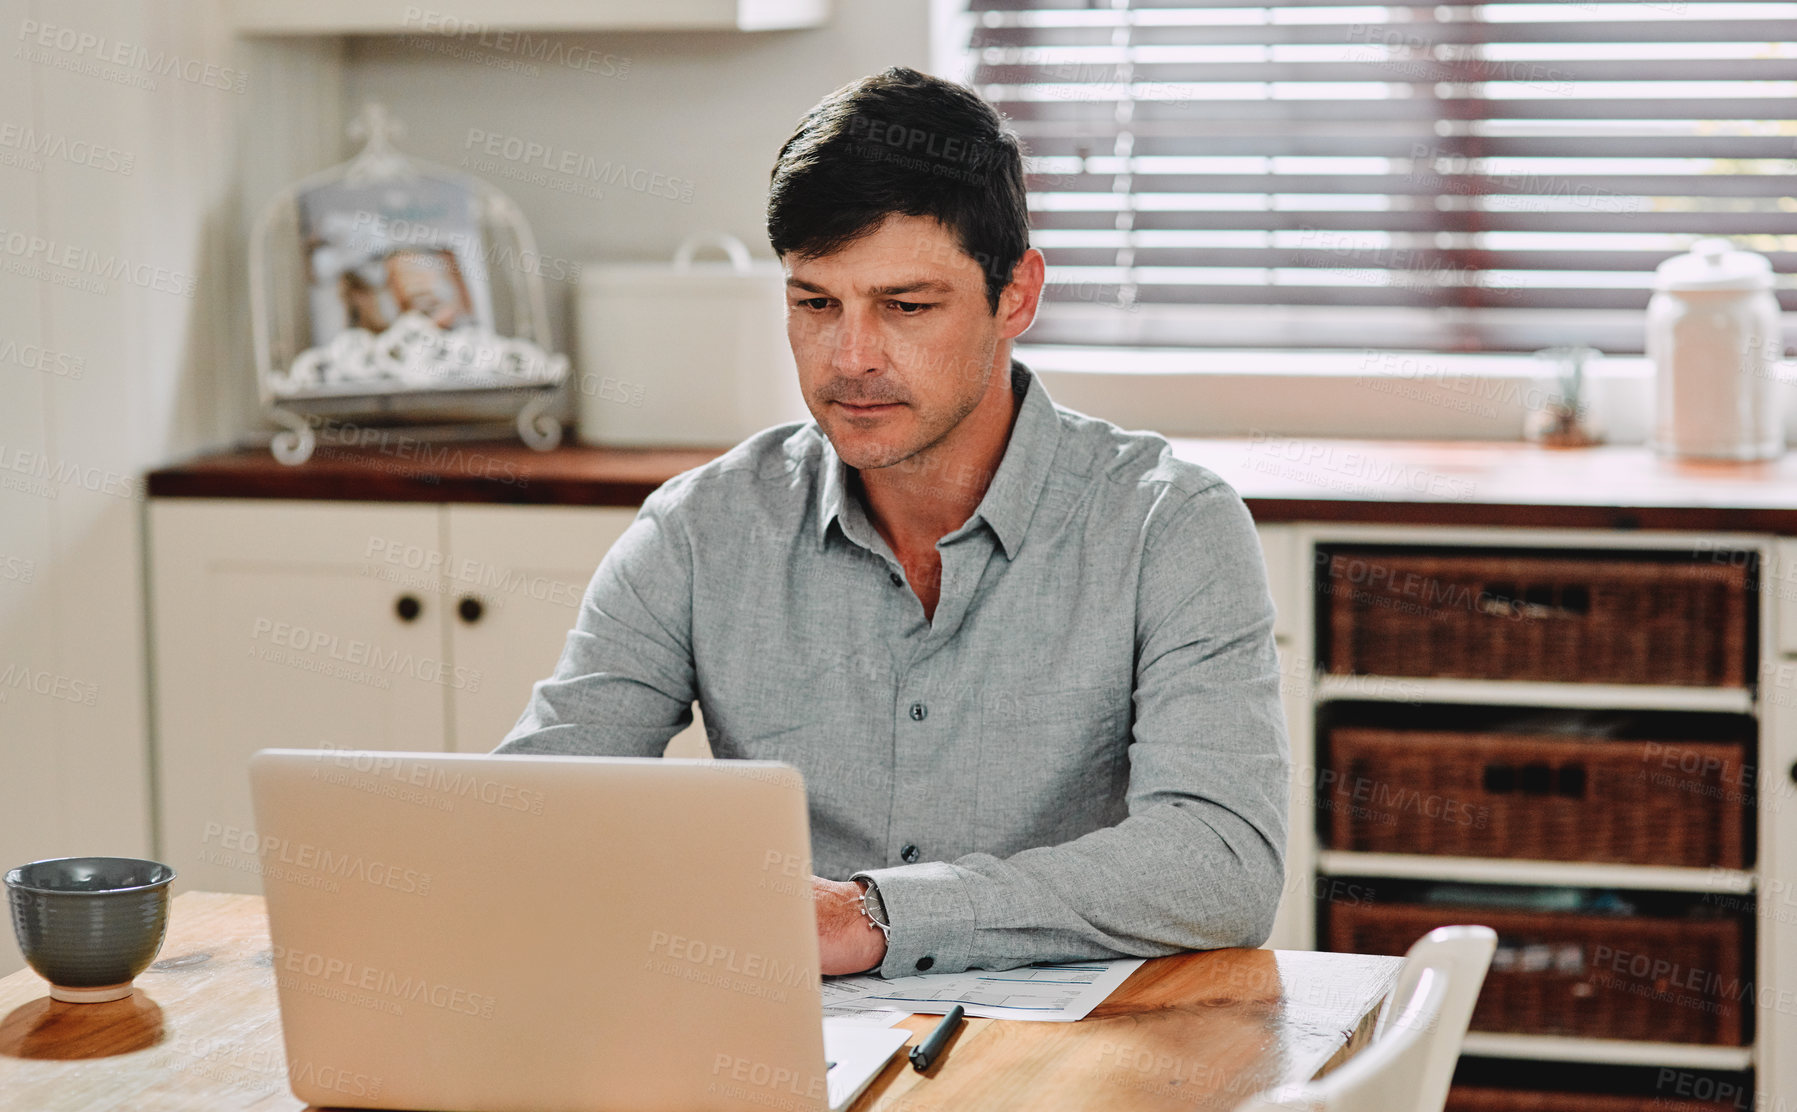 Buy stock photo Cropped shot of a man using his laptop while sitting at home